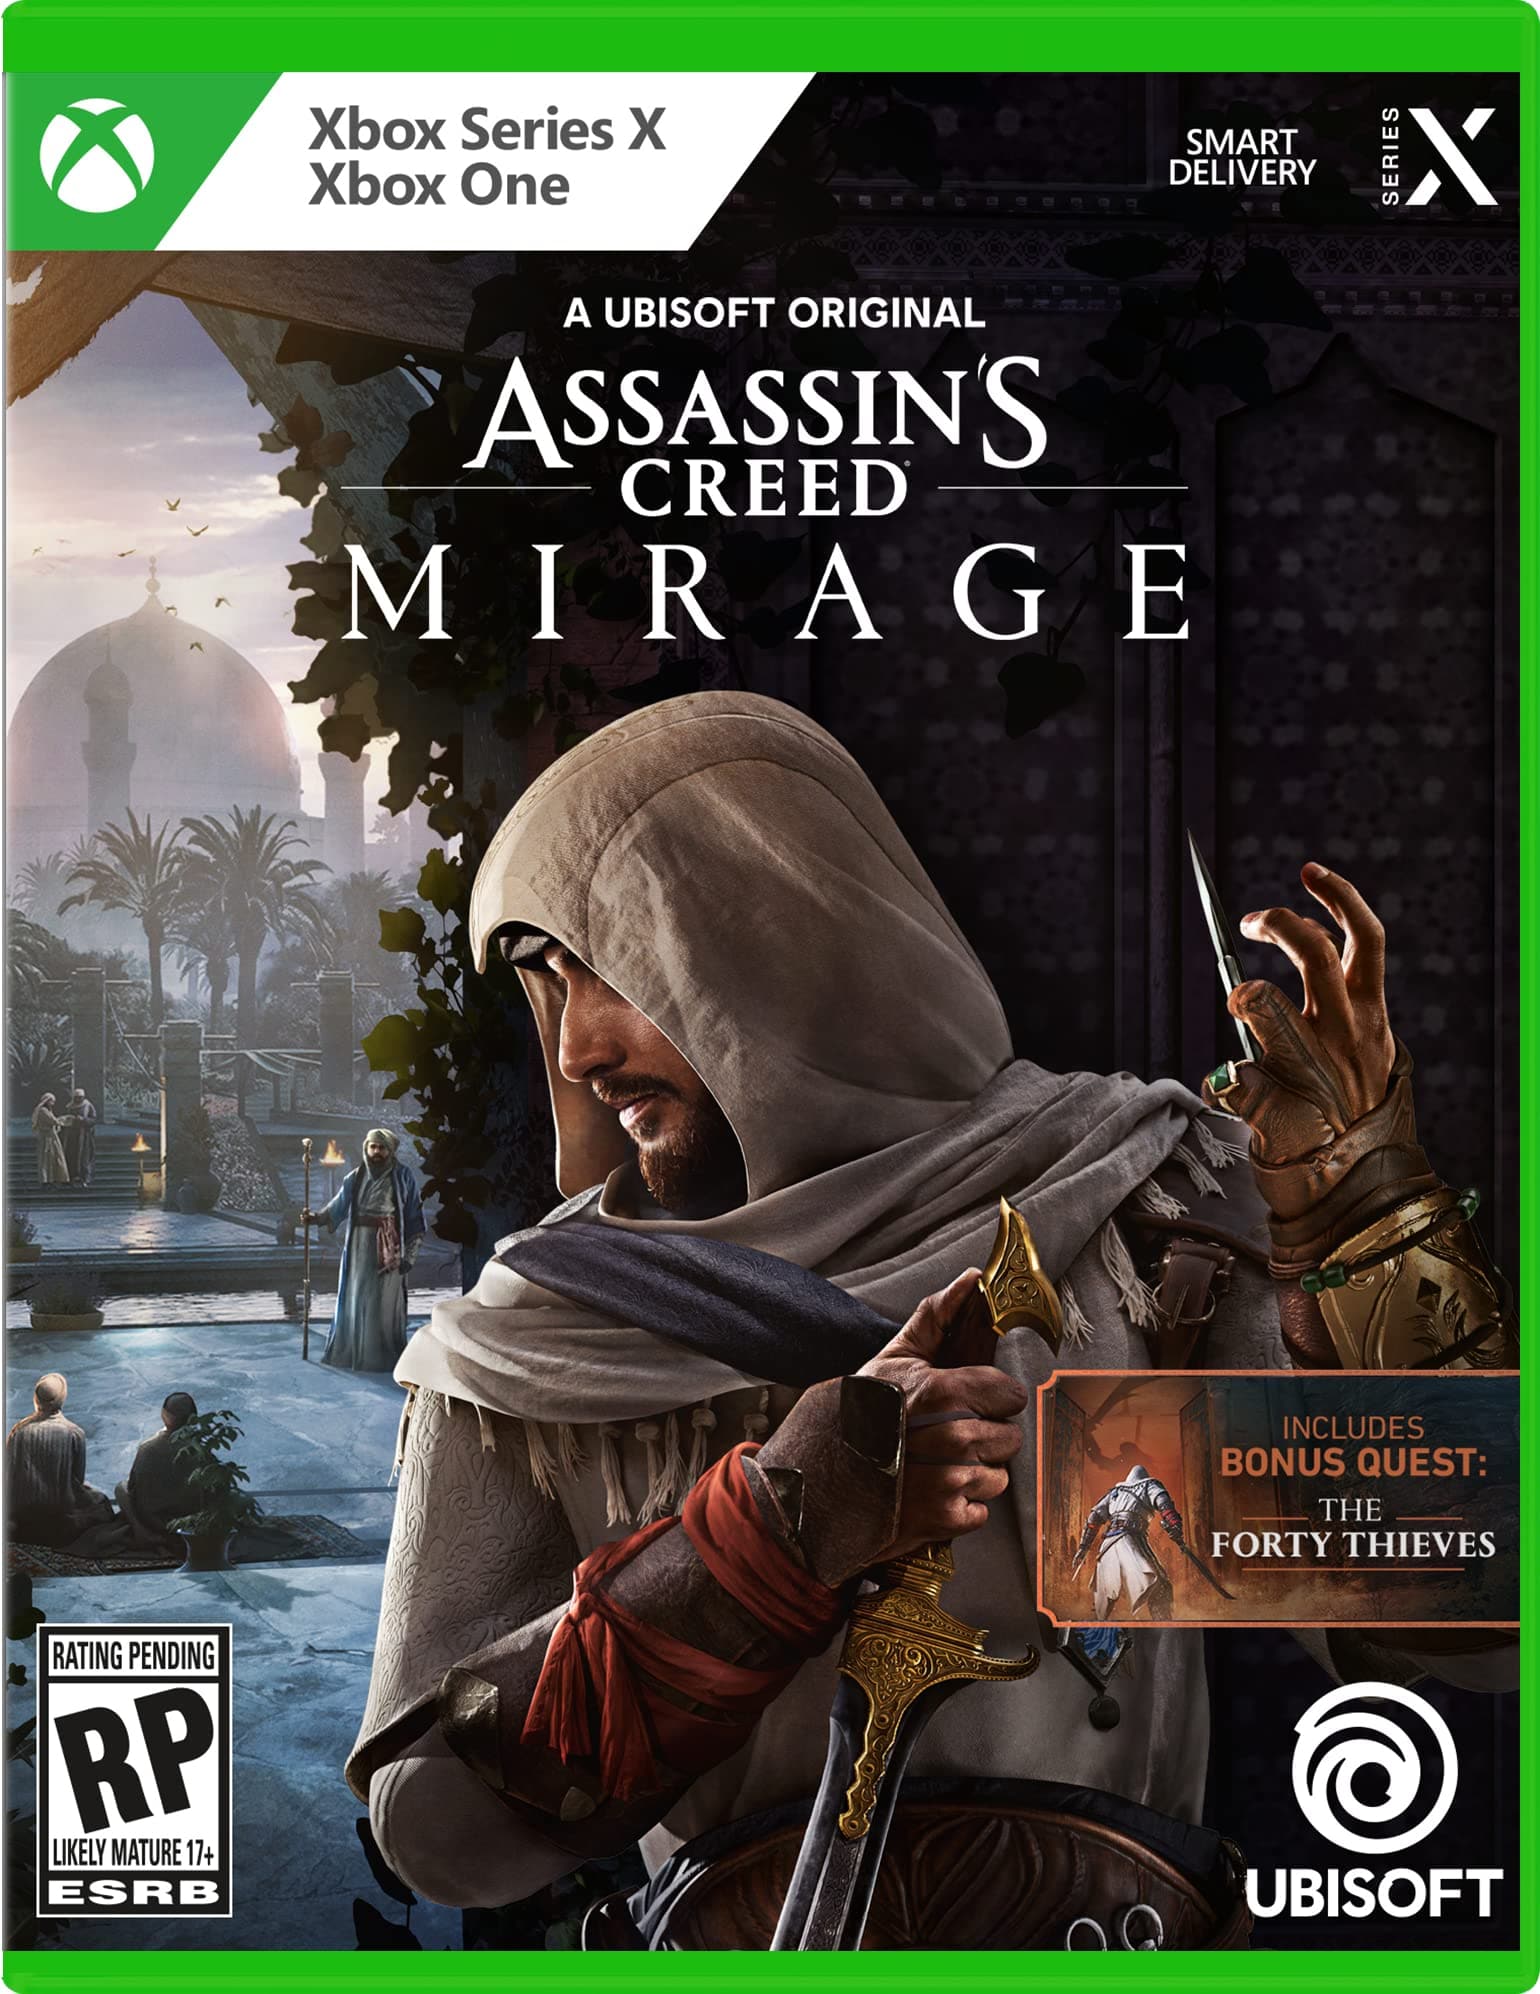 Assassin's Creed Mirage (Standard Edition) - Xbox